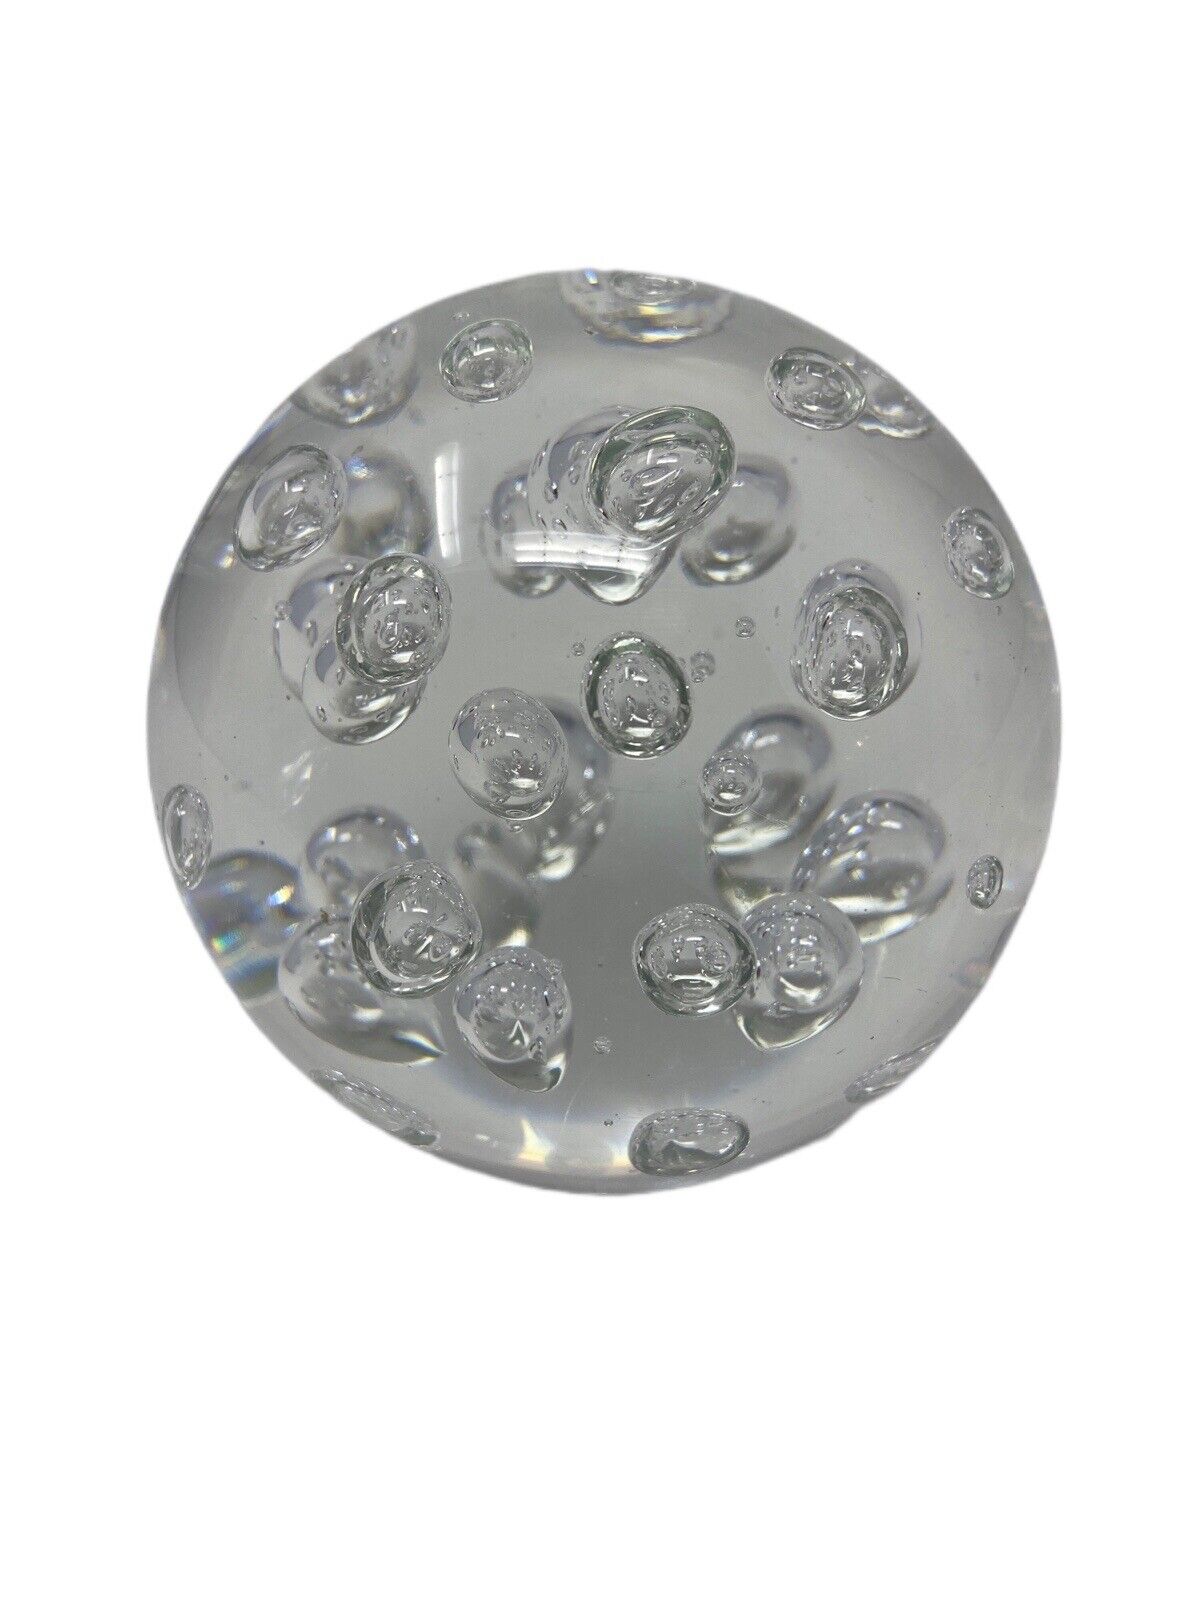 Vintage Pier 1 Round Clear Glass Controlled Bubbles Paperweight 4.25” Art Decor